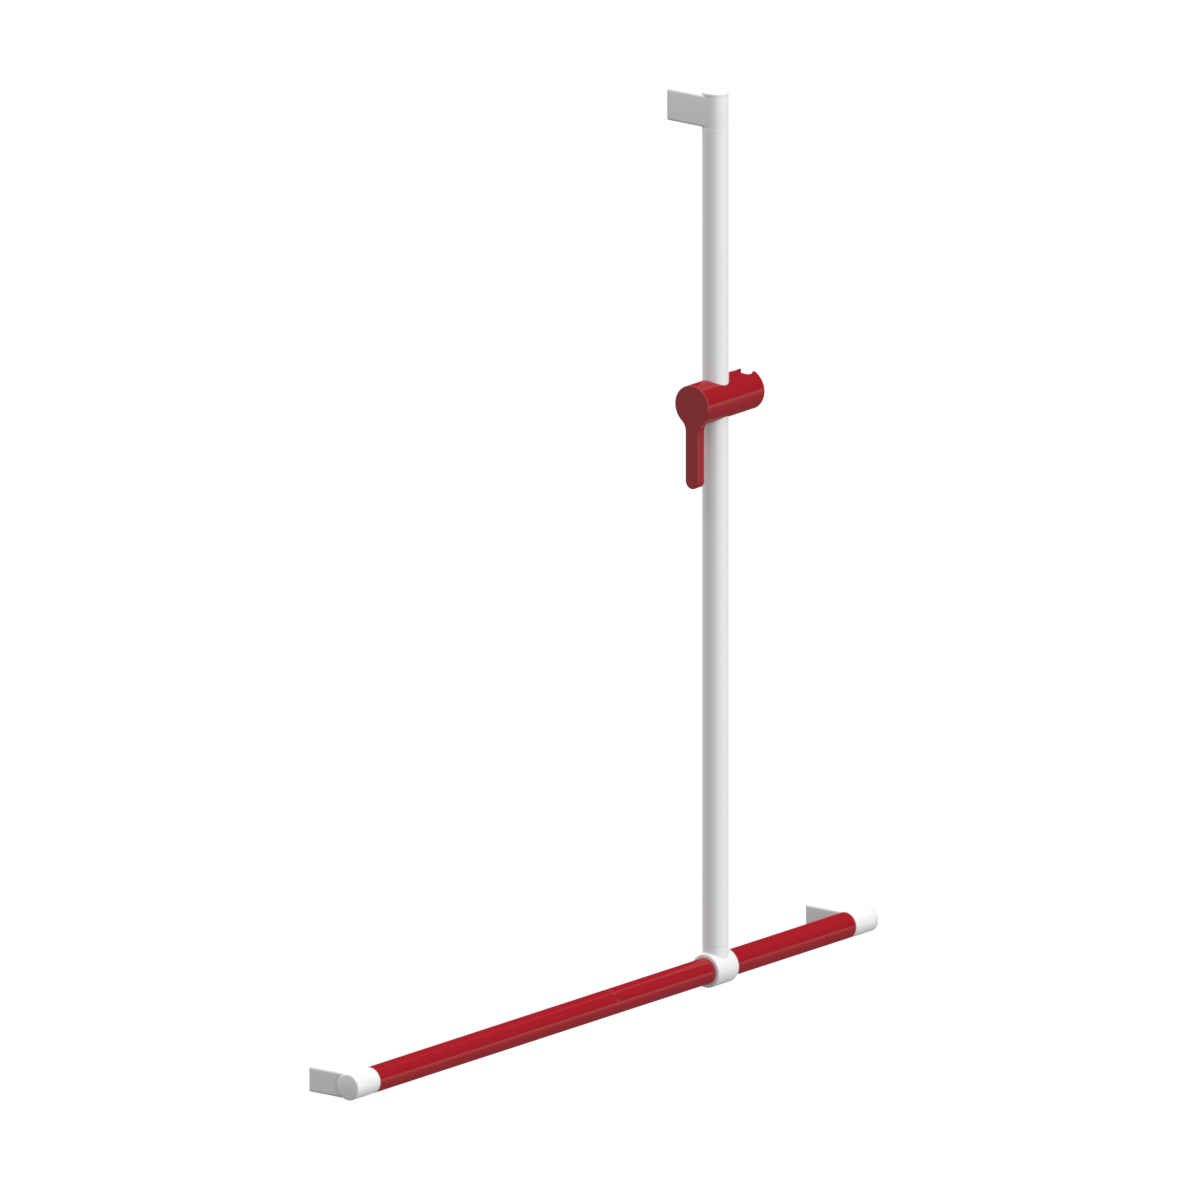 Verso Care Duo Shower handrail, with movable shower handrail, left and right, 1000 x 1100 mm, Red-White